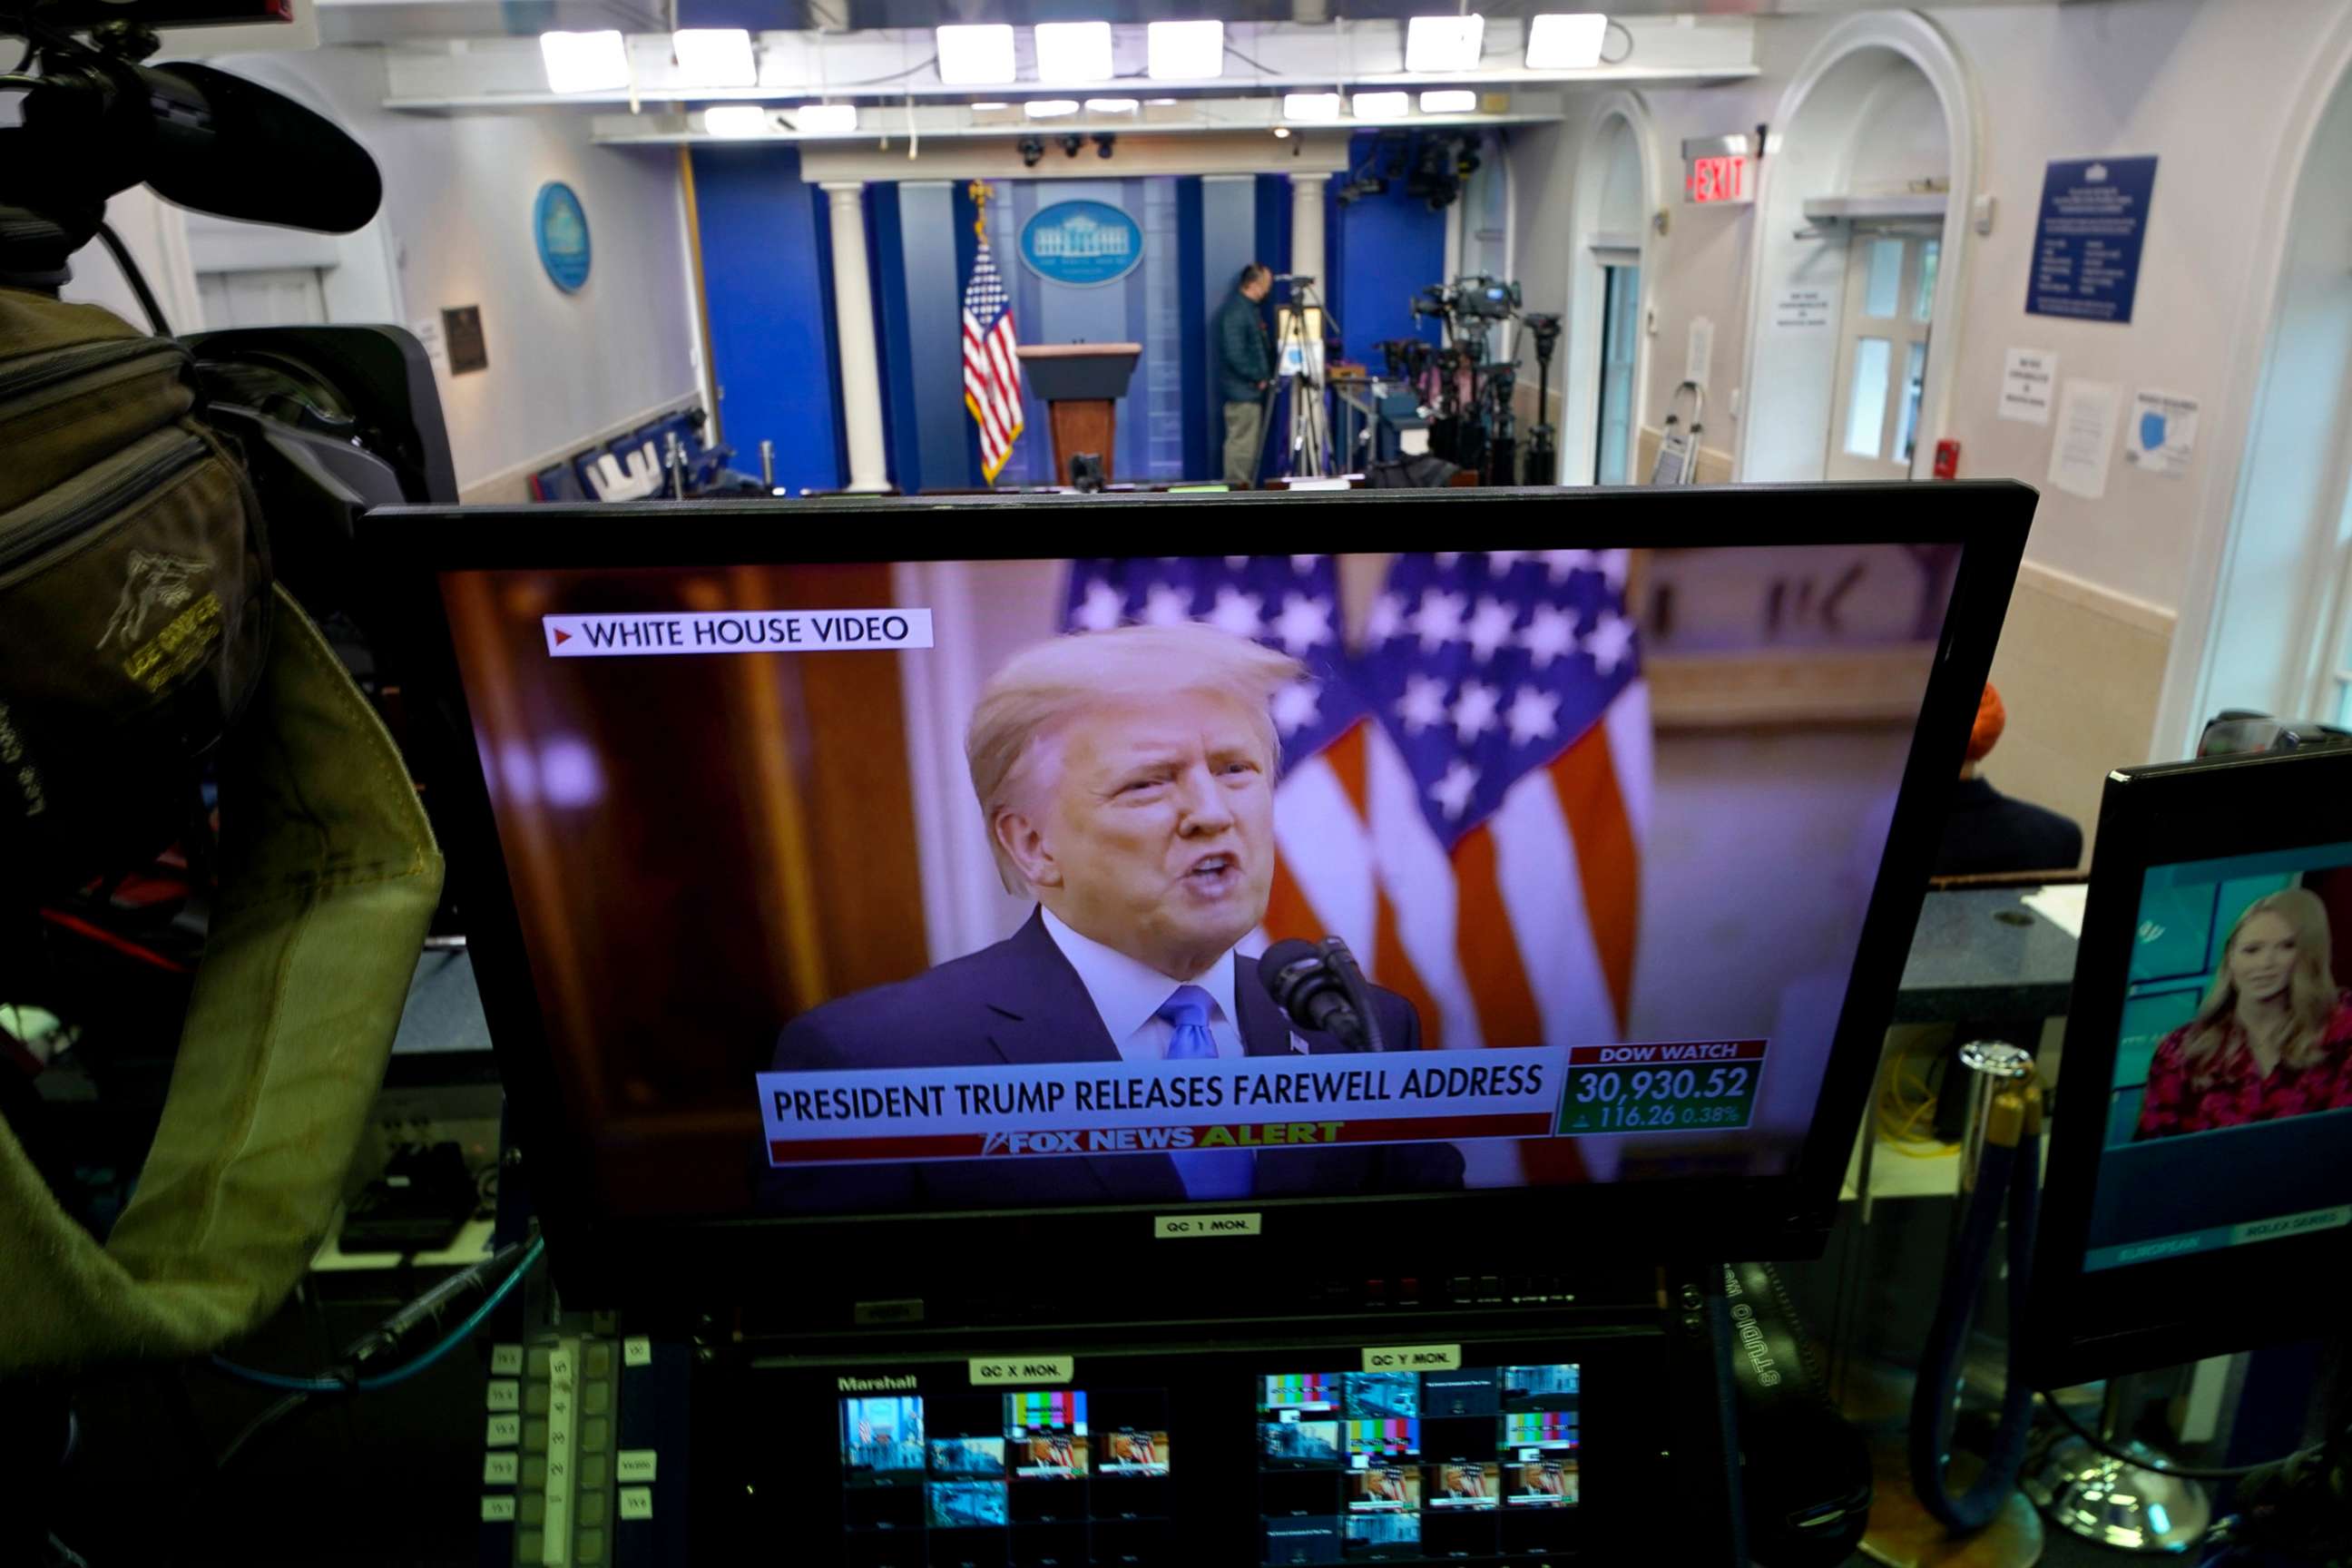 PHOTO: President Trump is seen on a network monitor after his pre-recorded farewell speech was released, inside the Brady Press Briefing Room at the White House, Jan. 19, 2021.